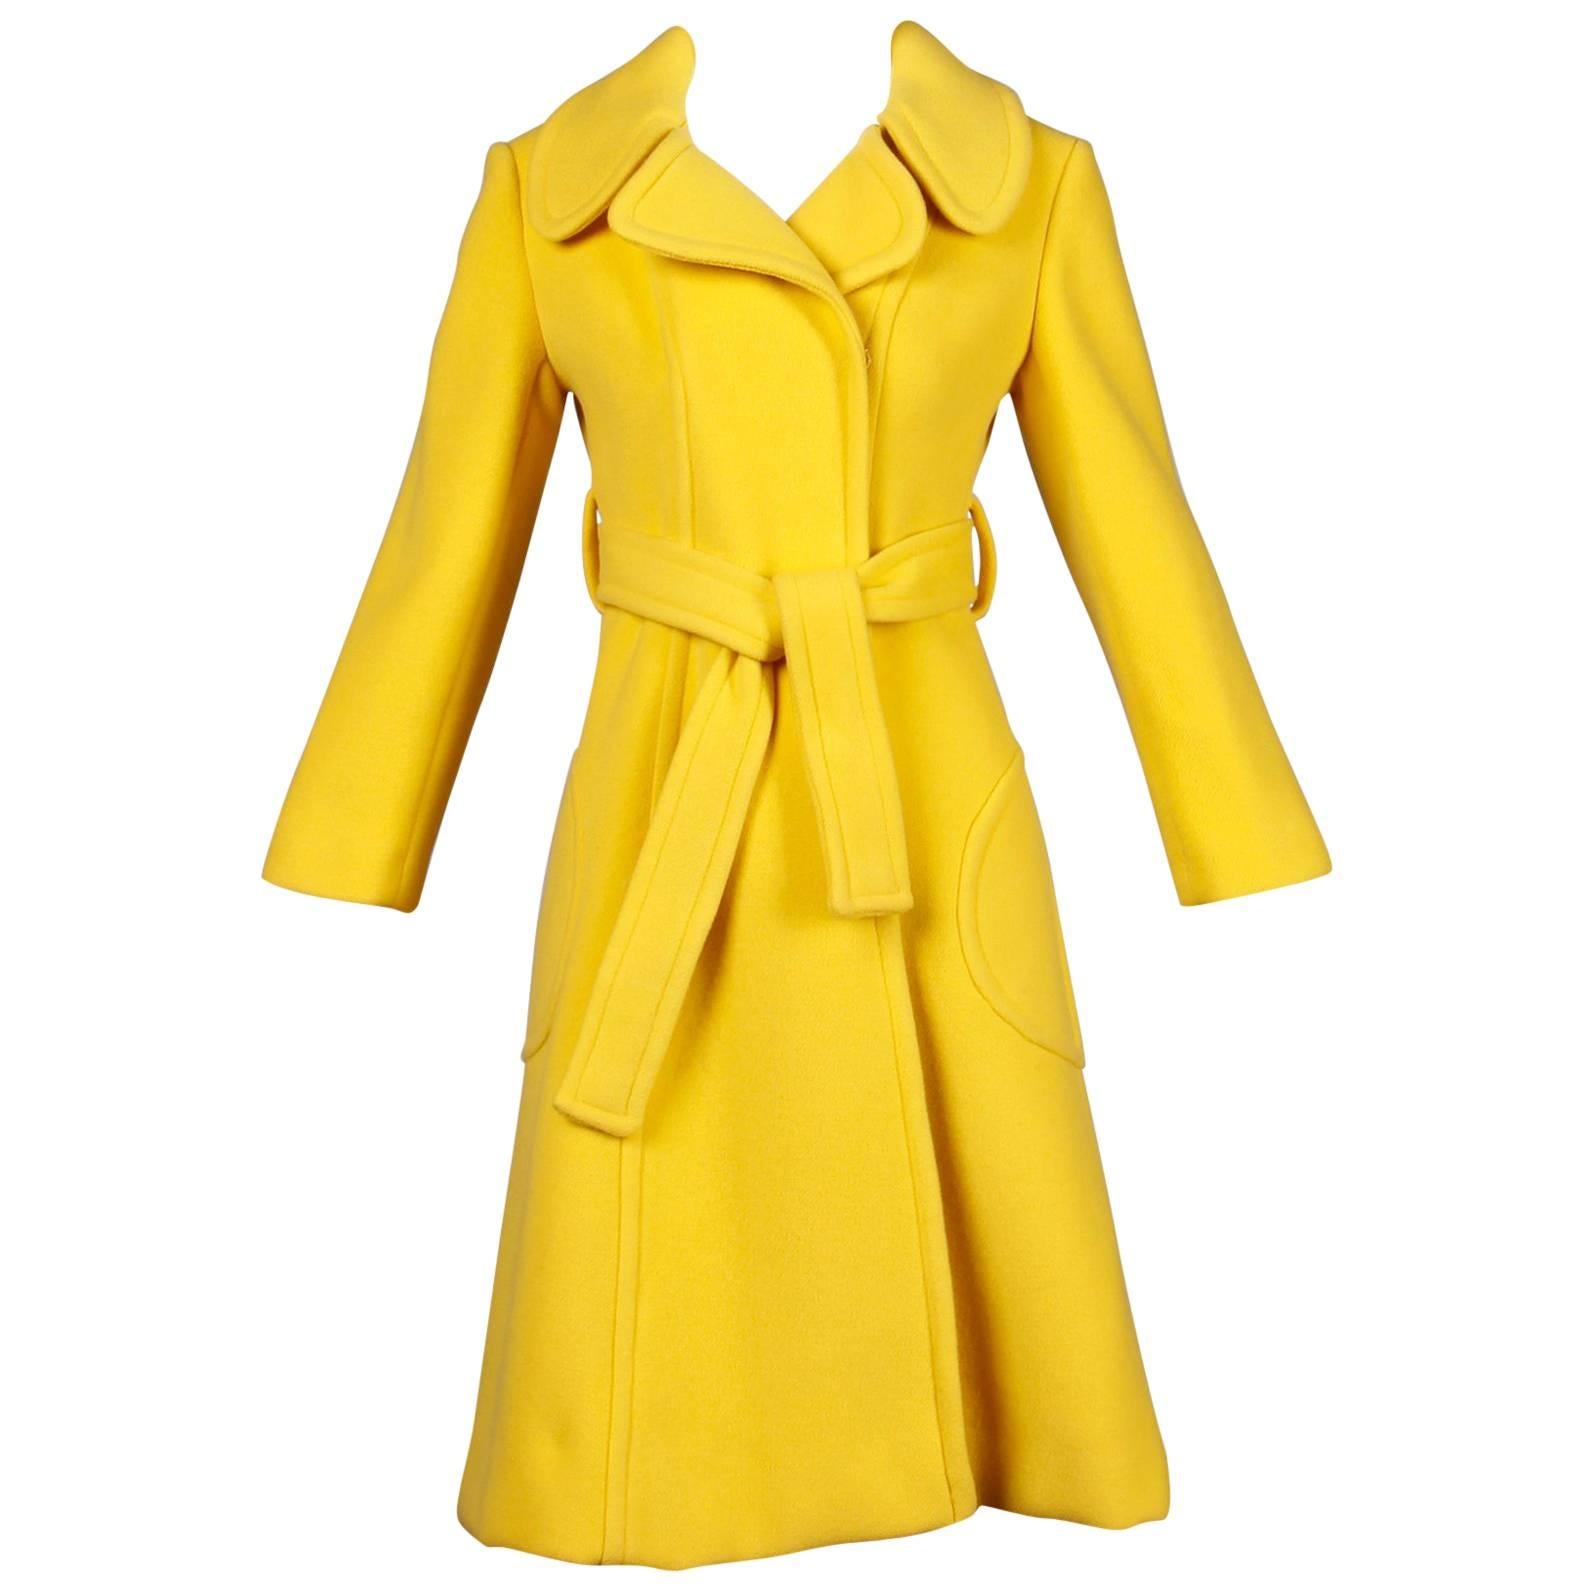 Rare Dia Diodato 1970s Vintage Yellow Wool Trench Wrap Coat with Rounded Collar